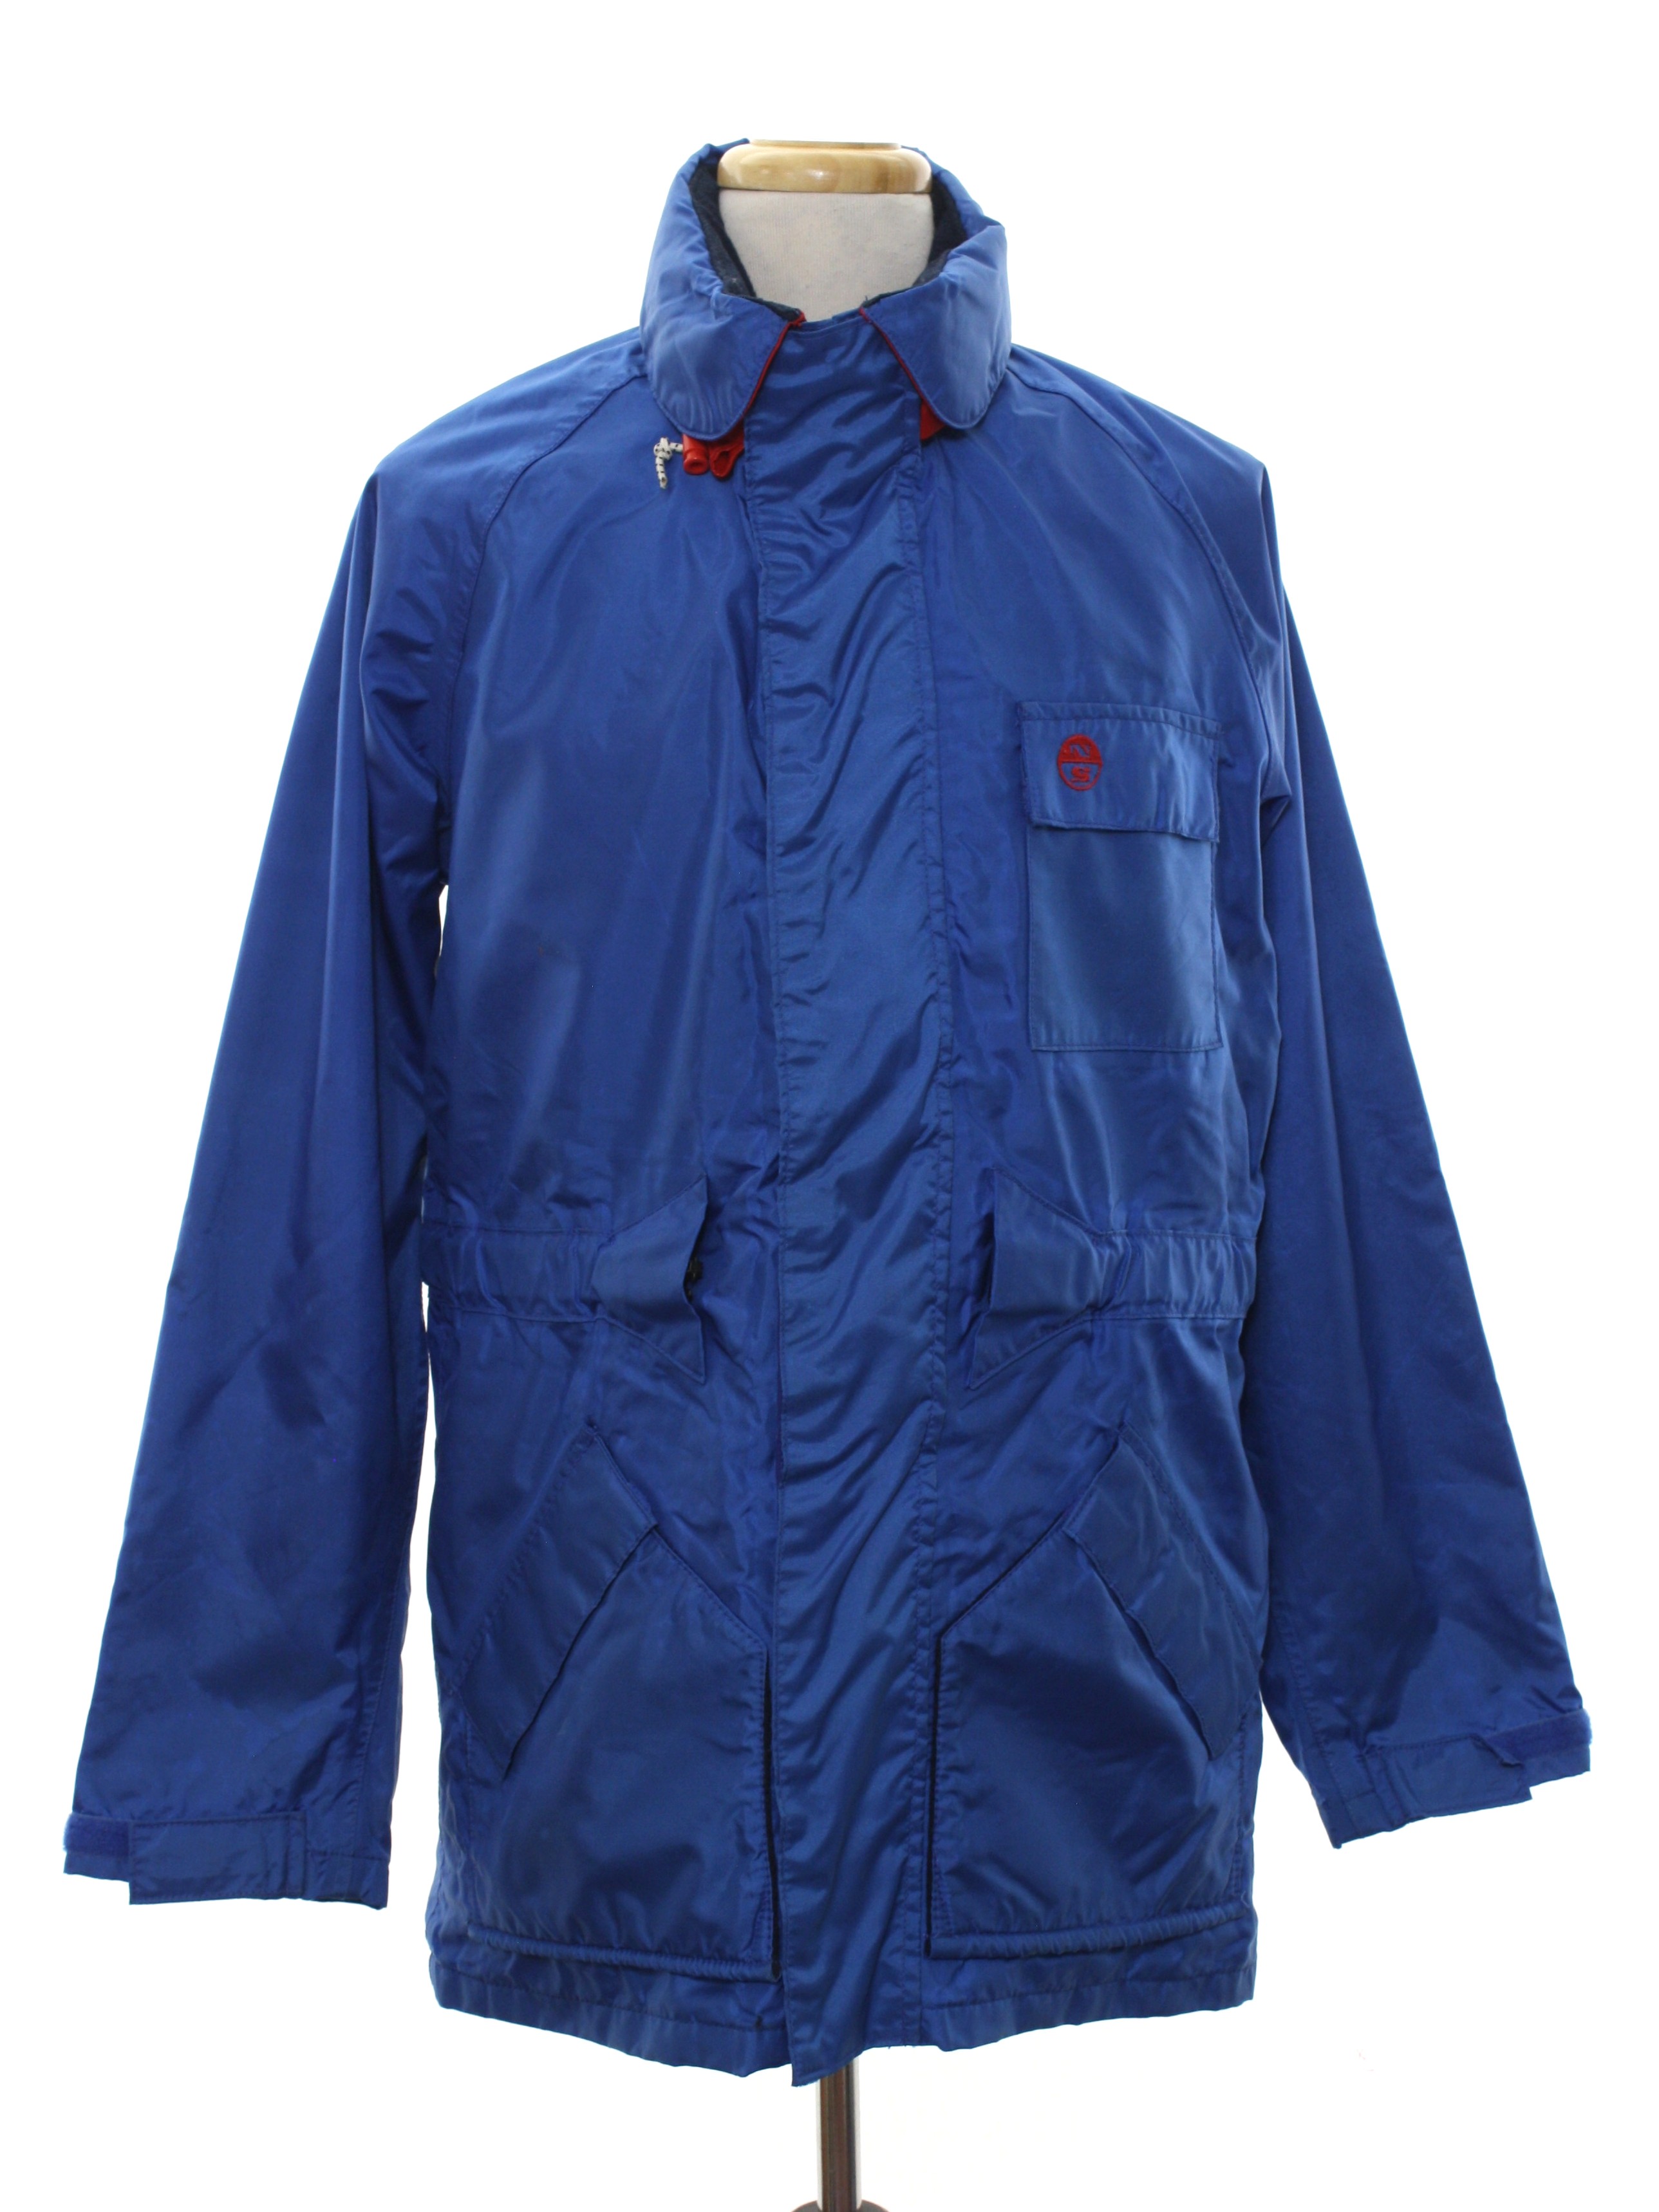 Retro 80s Jacket (North Sails) : Late 80s or Early 90s -North Sails ...